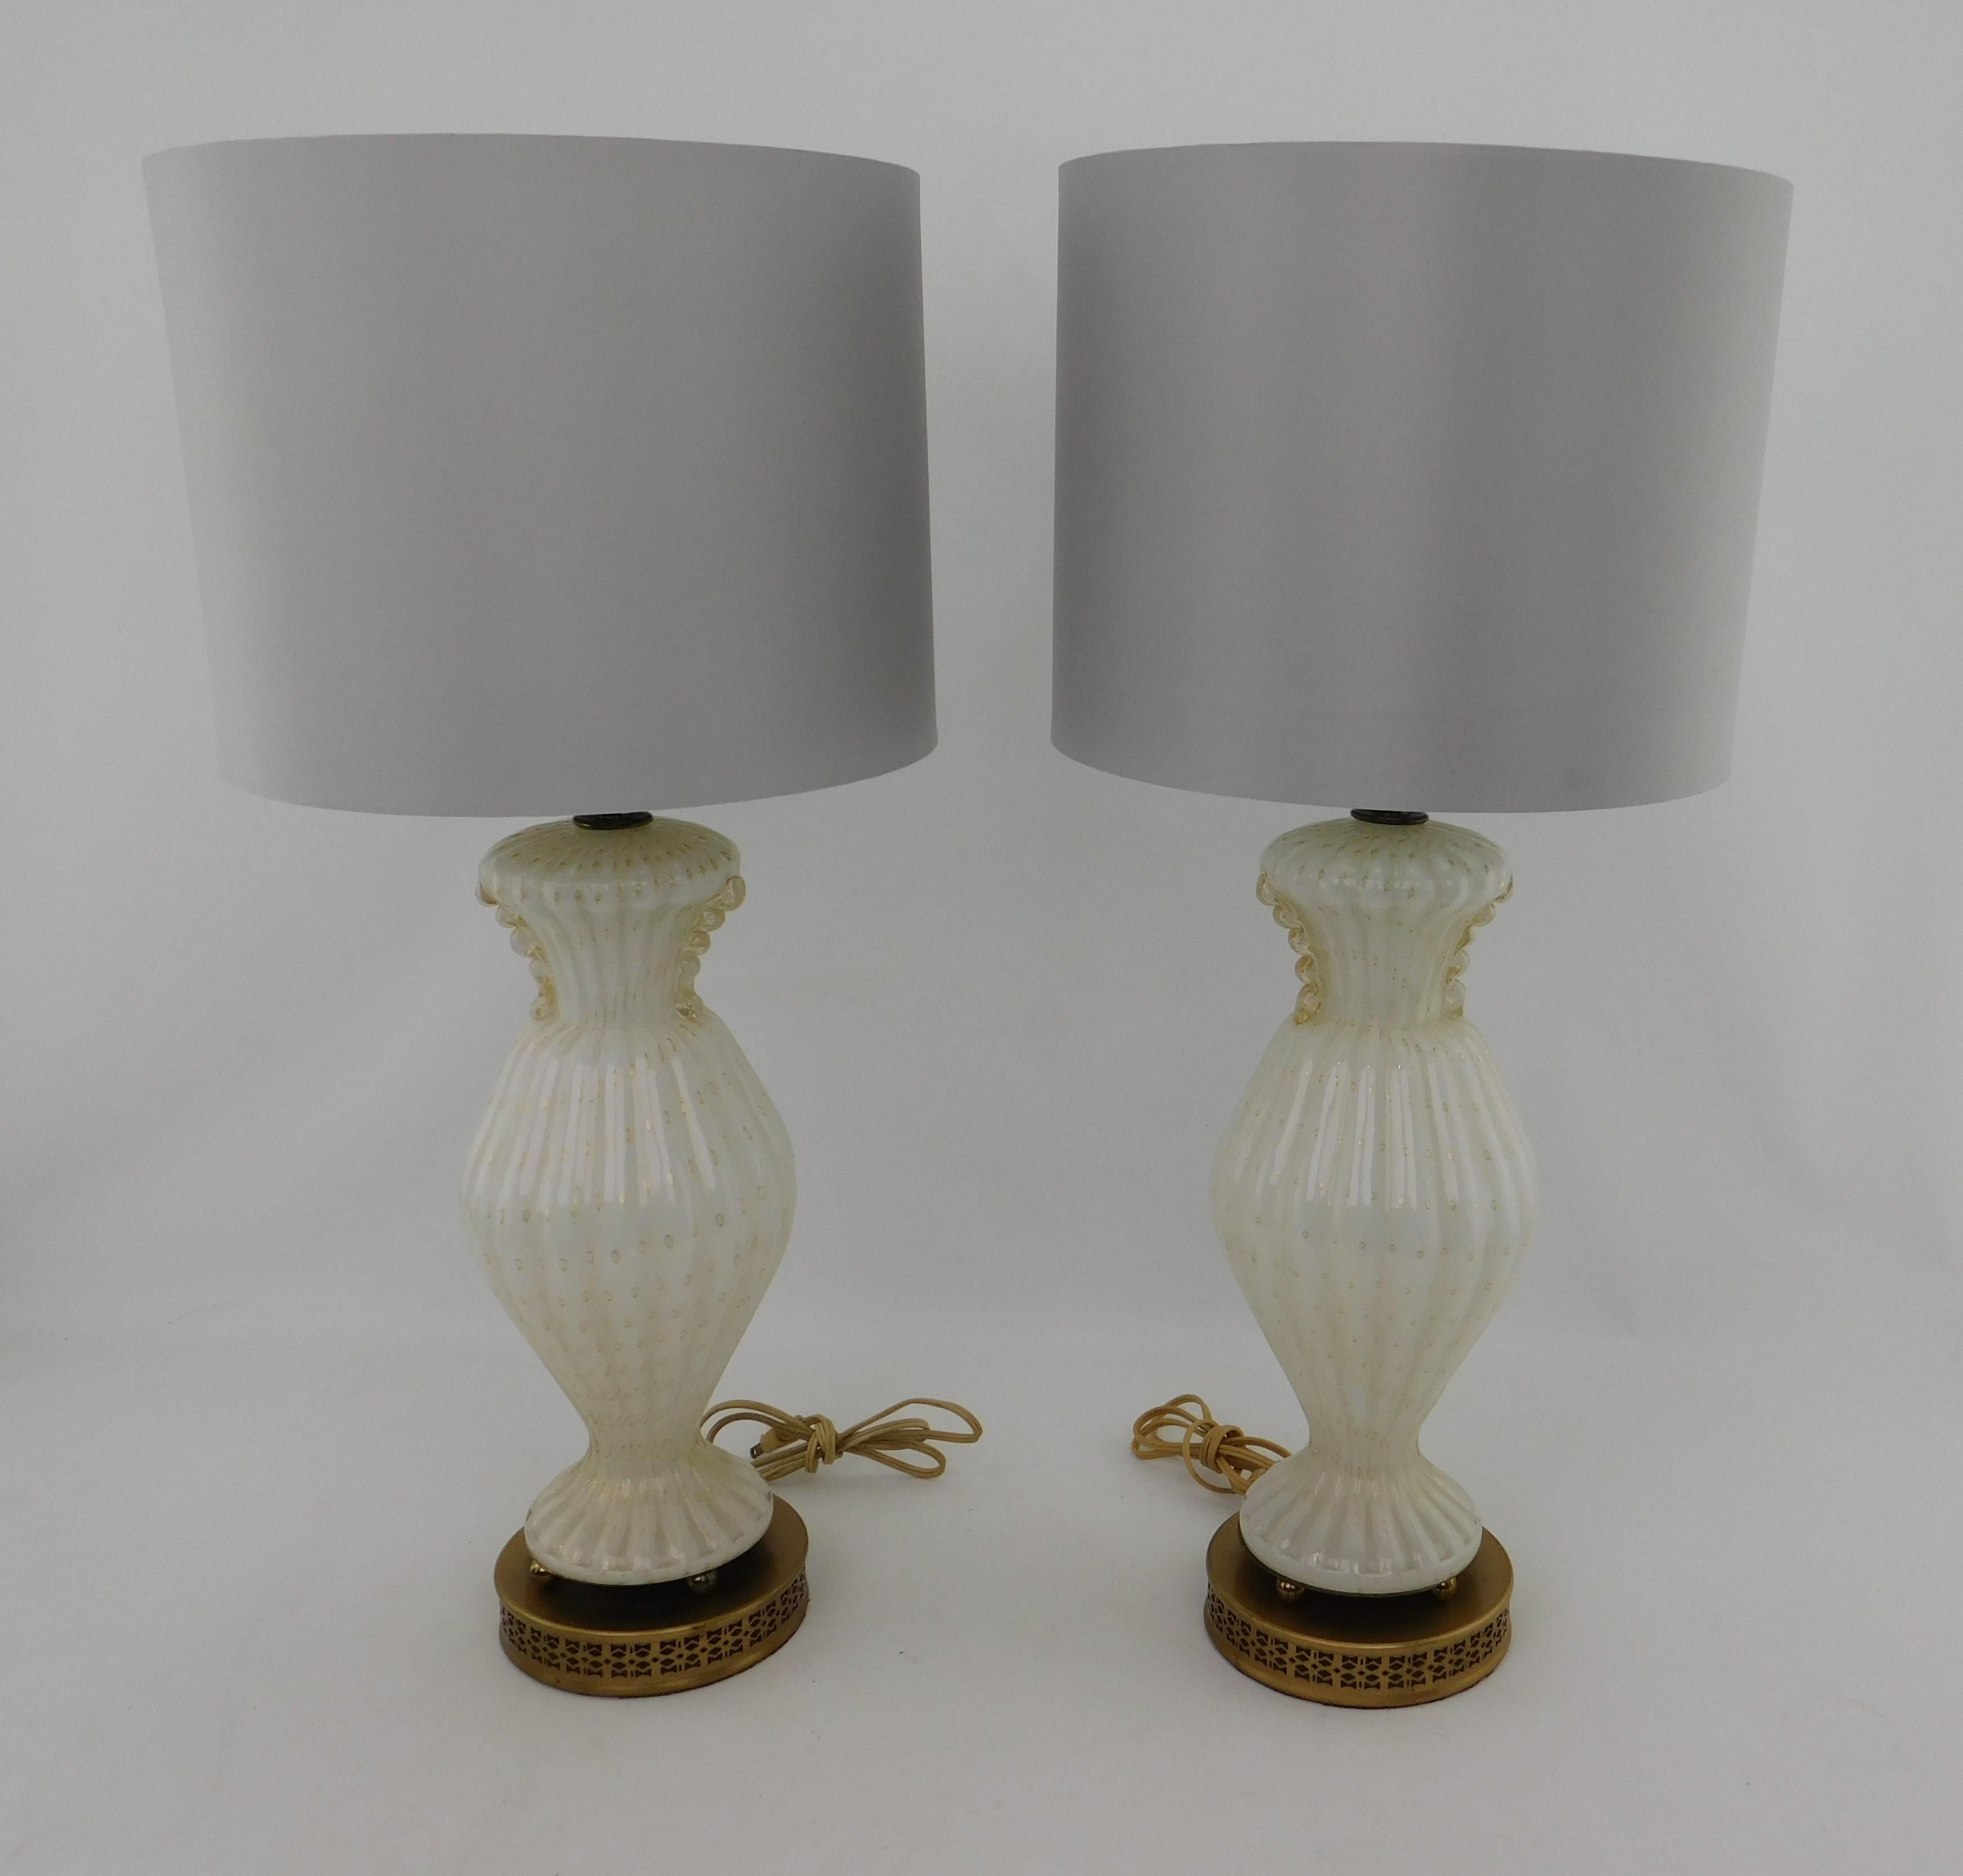 This pair of Mid-Century Modern art glass table lamp are made of hand blown art glass with gold flecks. The lamp was made in Murano Italy in approximately 1960. Sturdy metal bases with a brass like finish, both are in good working condition. The